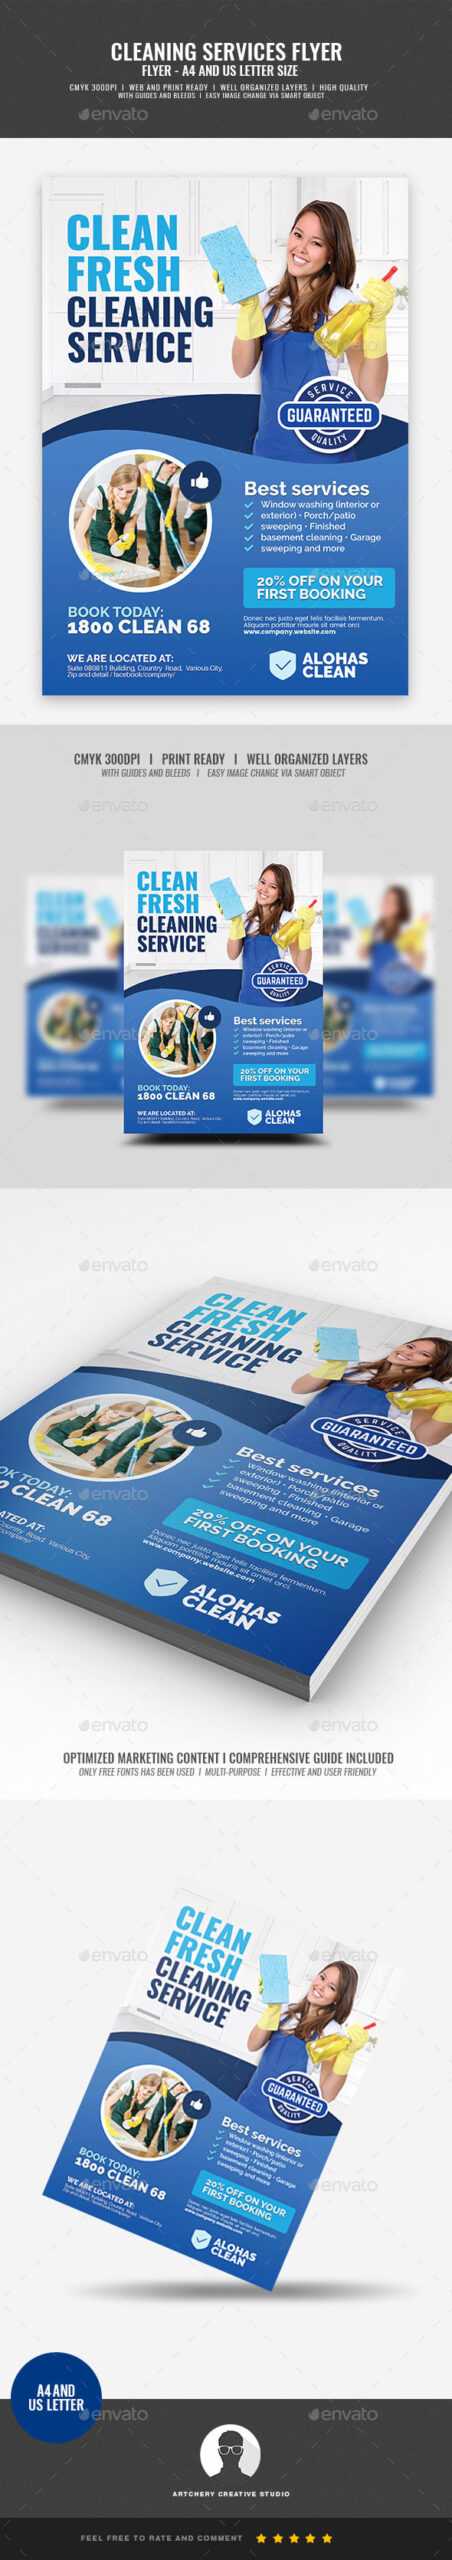 Commercial Cleaning Graphics, Designs & Templates Within Commercial Cleaning Flyer Templates